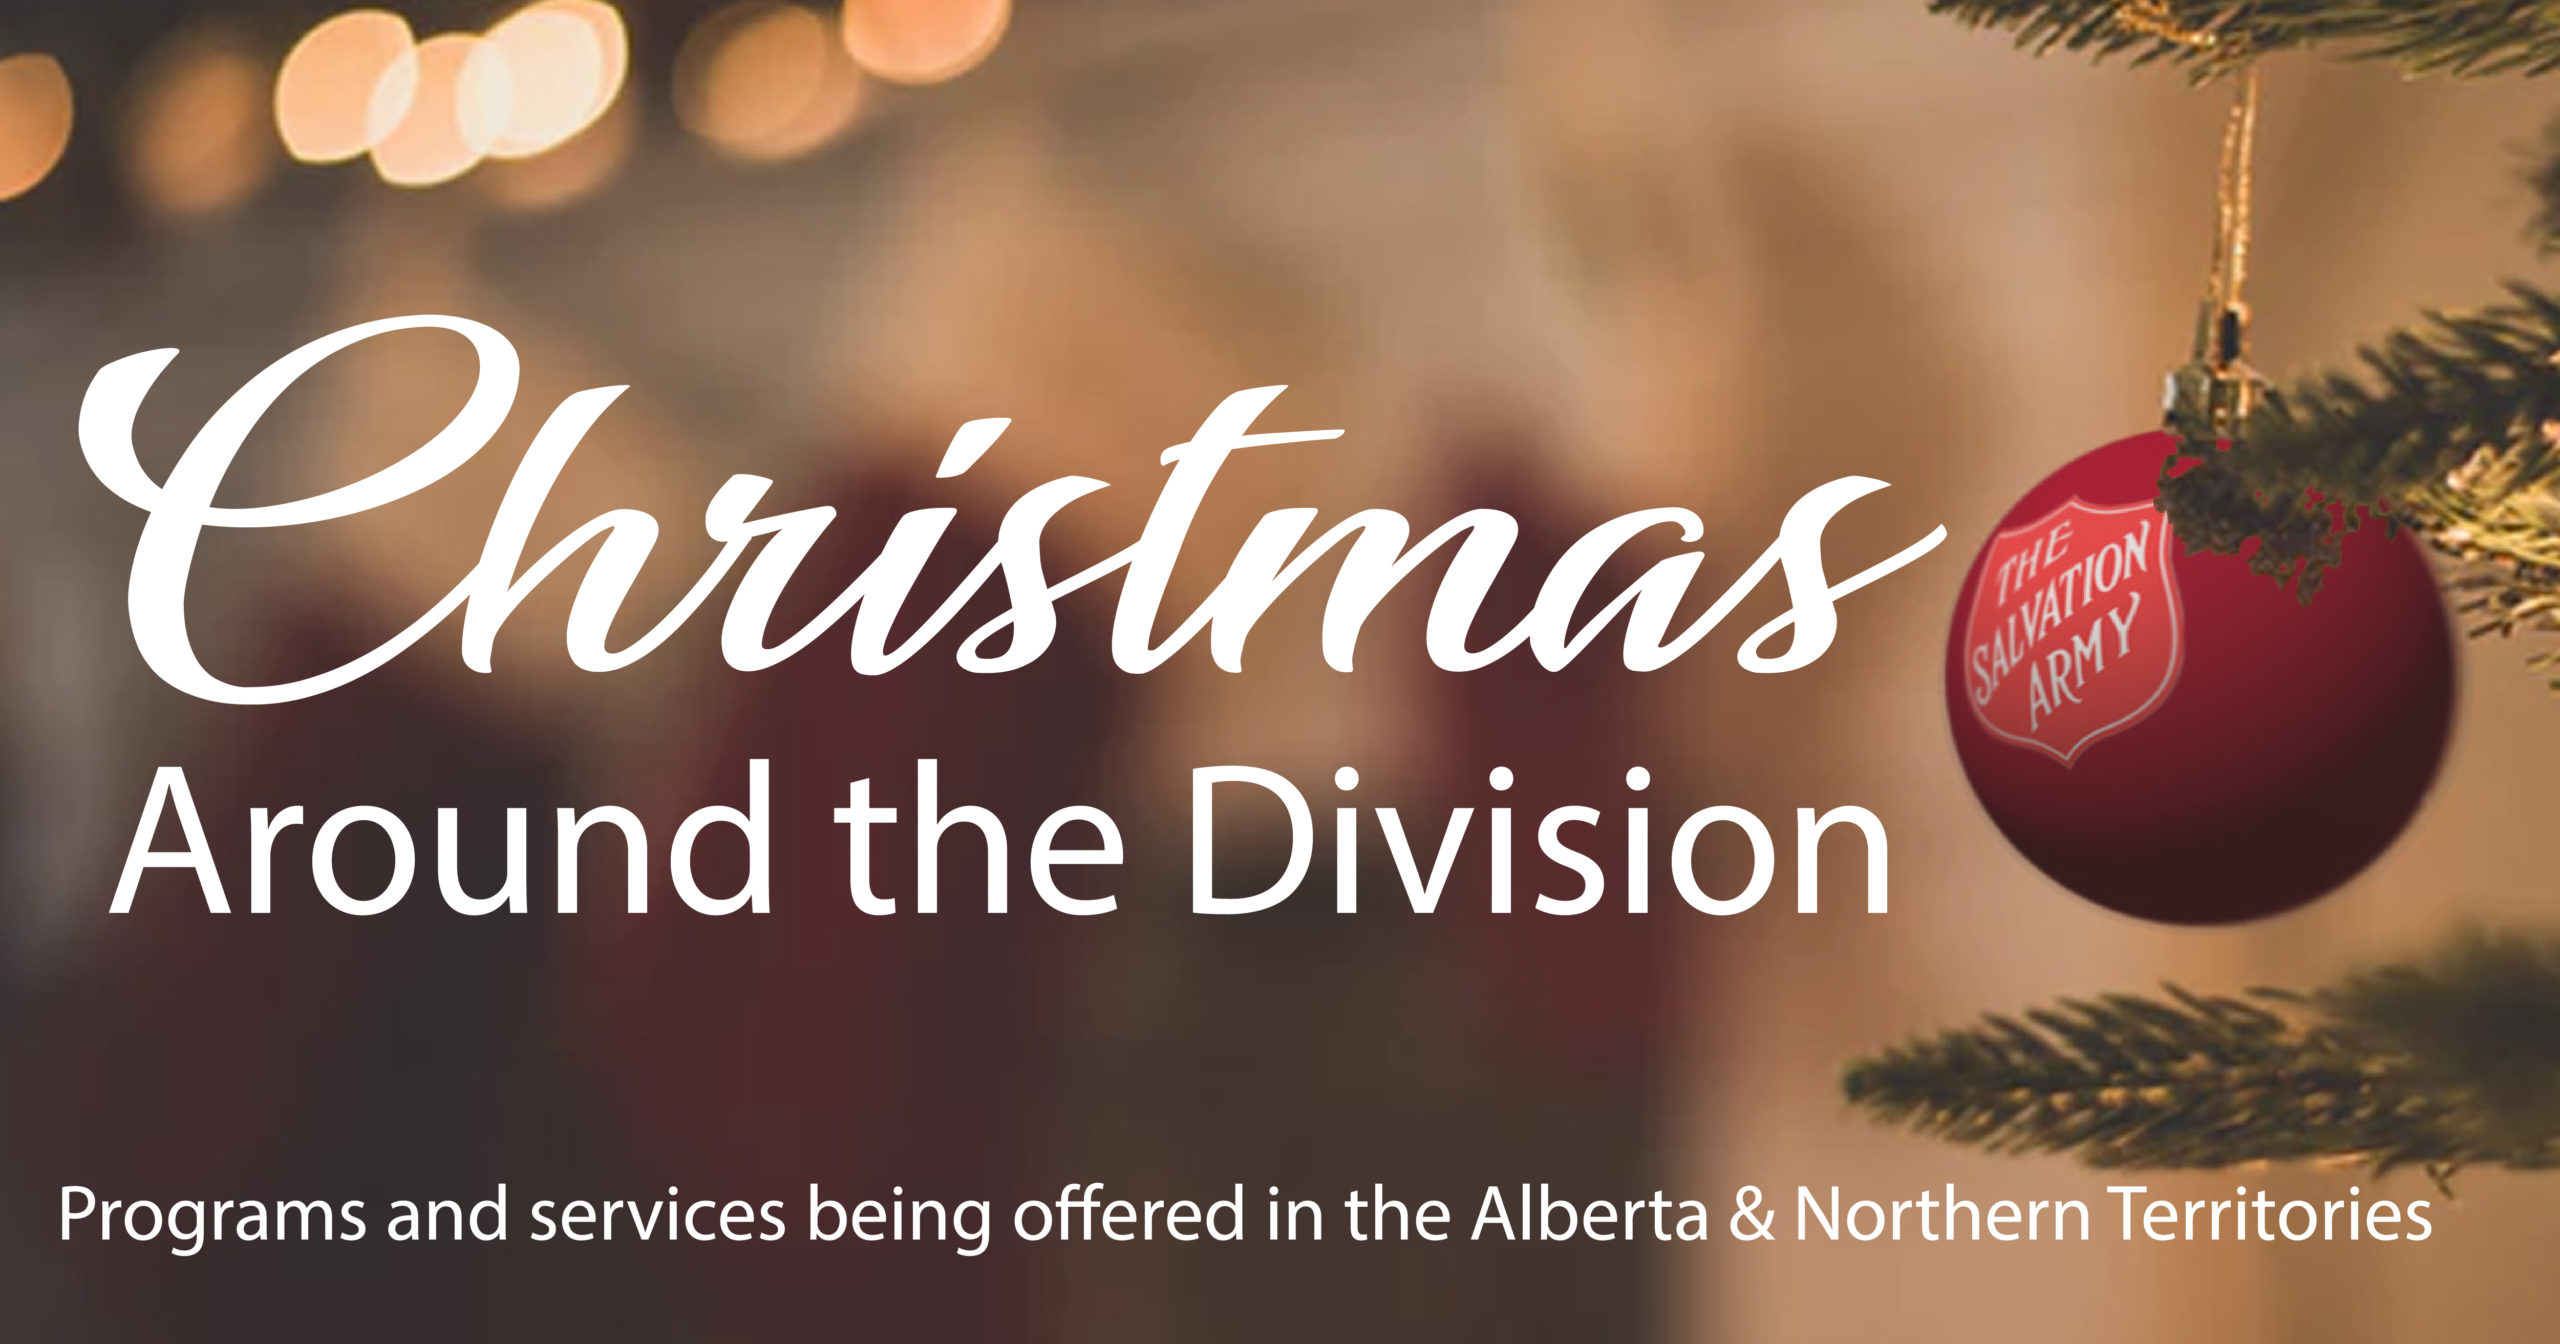 Christmas Kettles – The Salvation Army in Canada